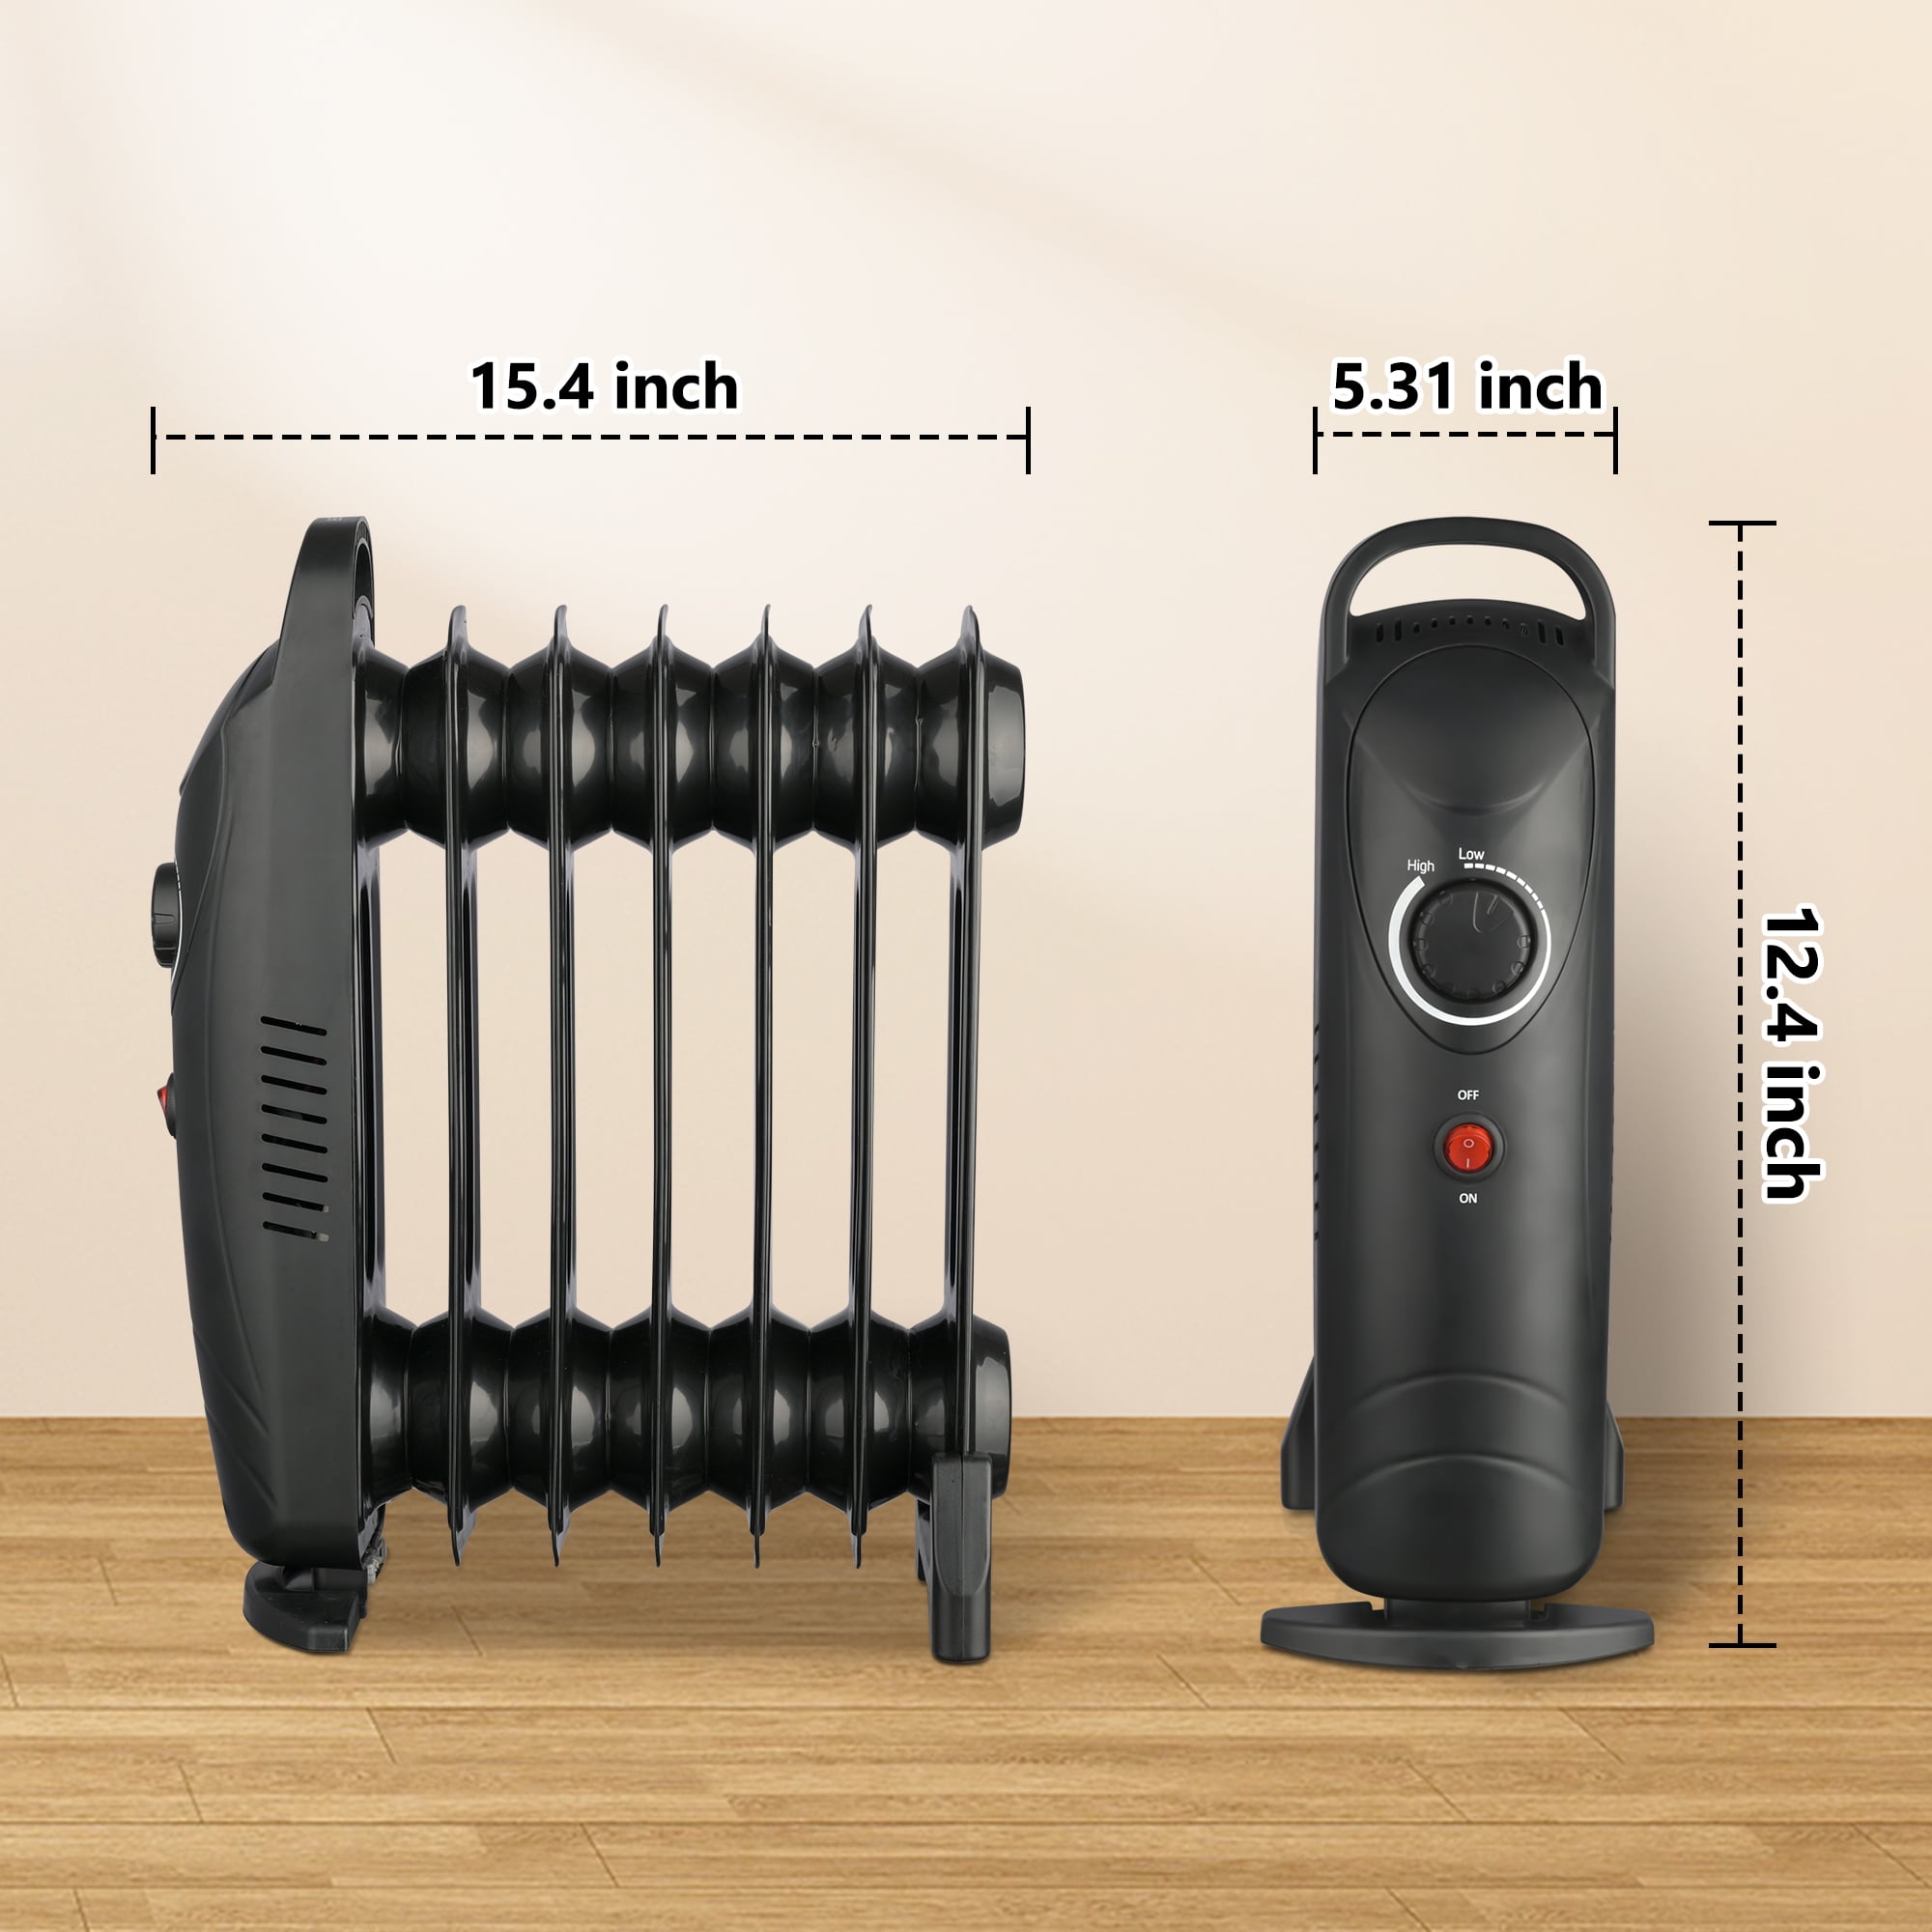 Lifeplus 700-Watt Oil Filled Radiator Heater, Small Portable Space Heater  with Adjustable Programmable Thermostat, Quiet, Black OSHE0136-OH12 - The  Home Depot